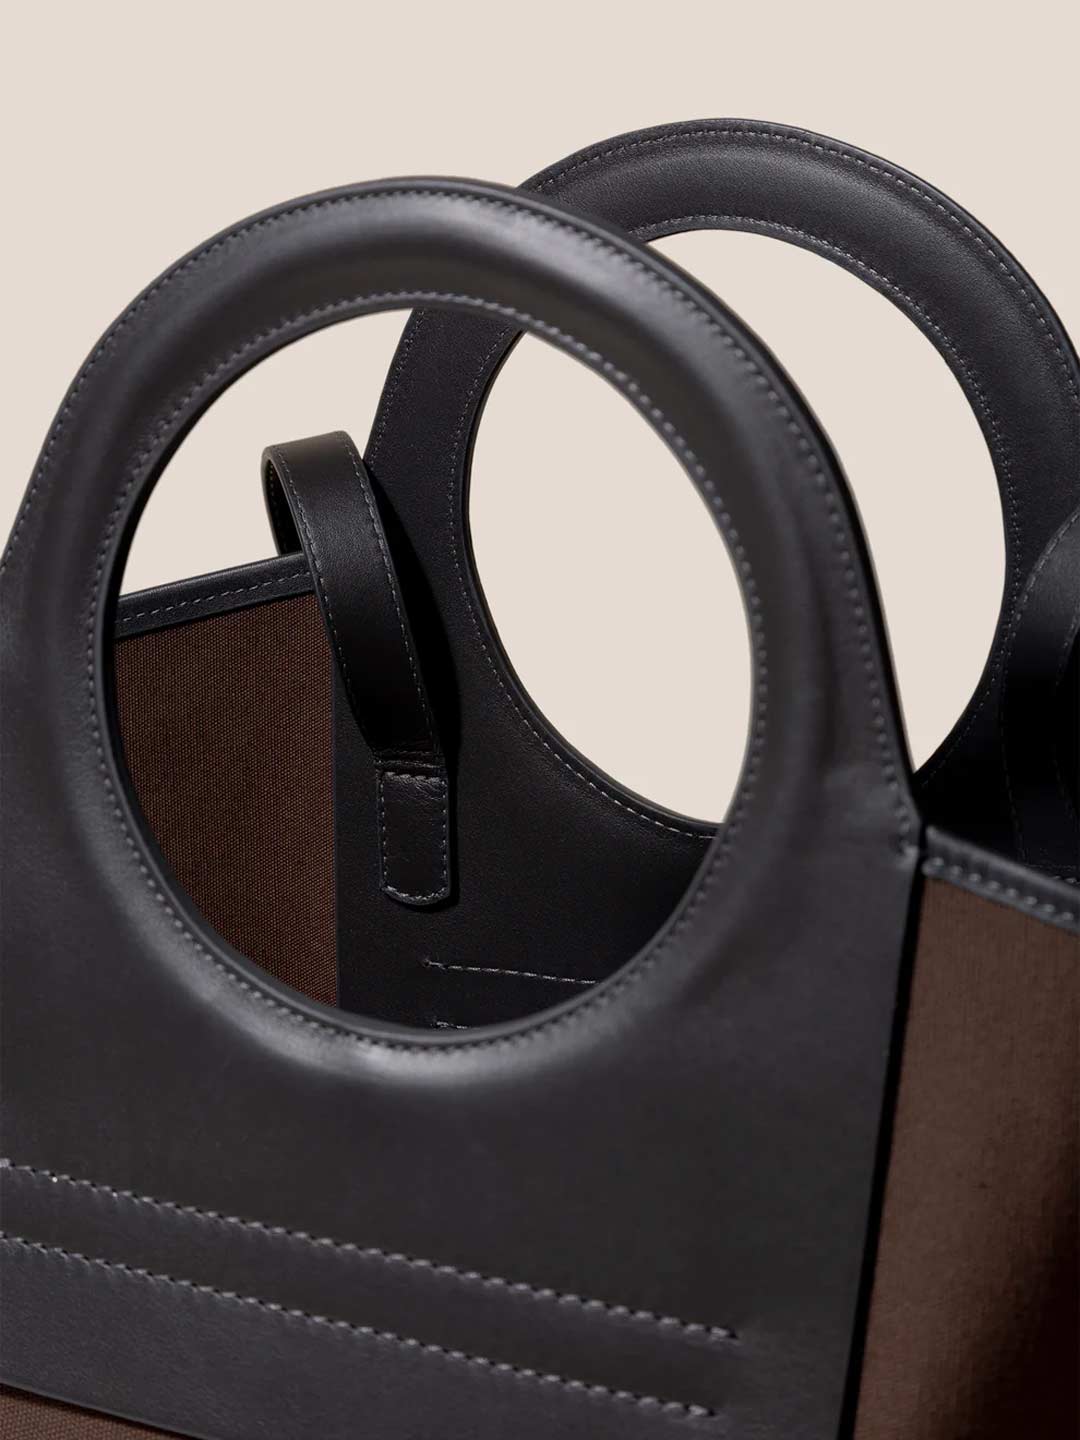 CALA S - Leather-trimmed Canvas Tote Bag - Dark Brown/Charcoal